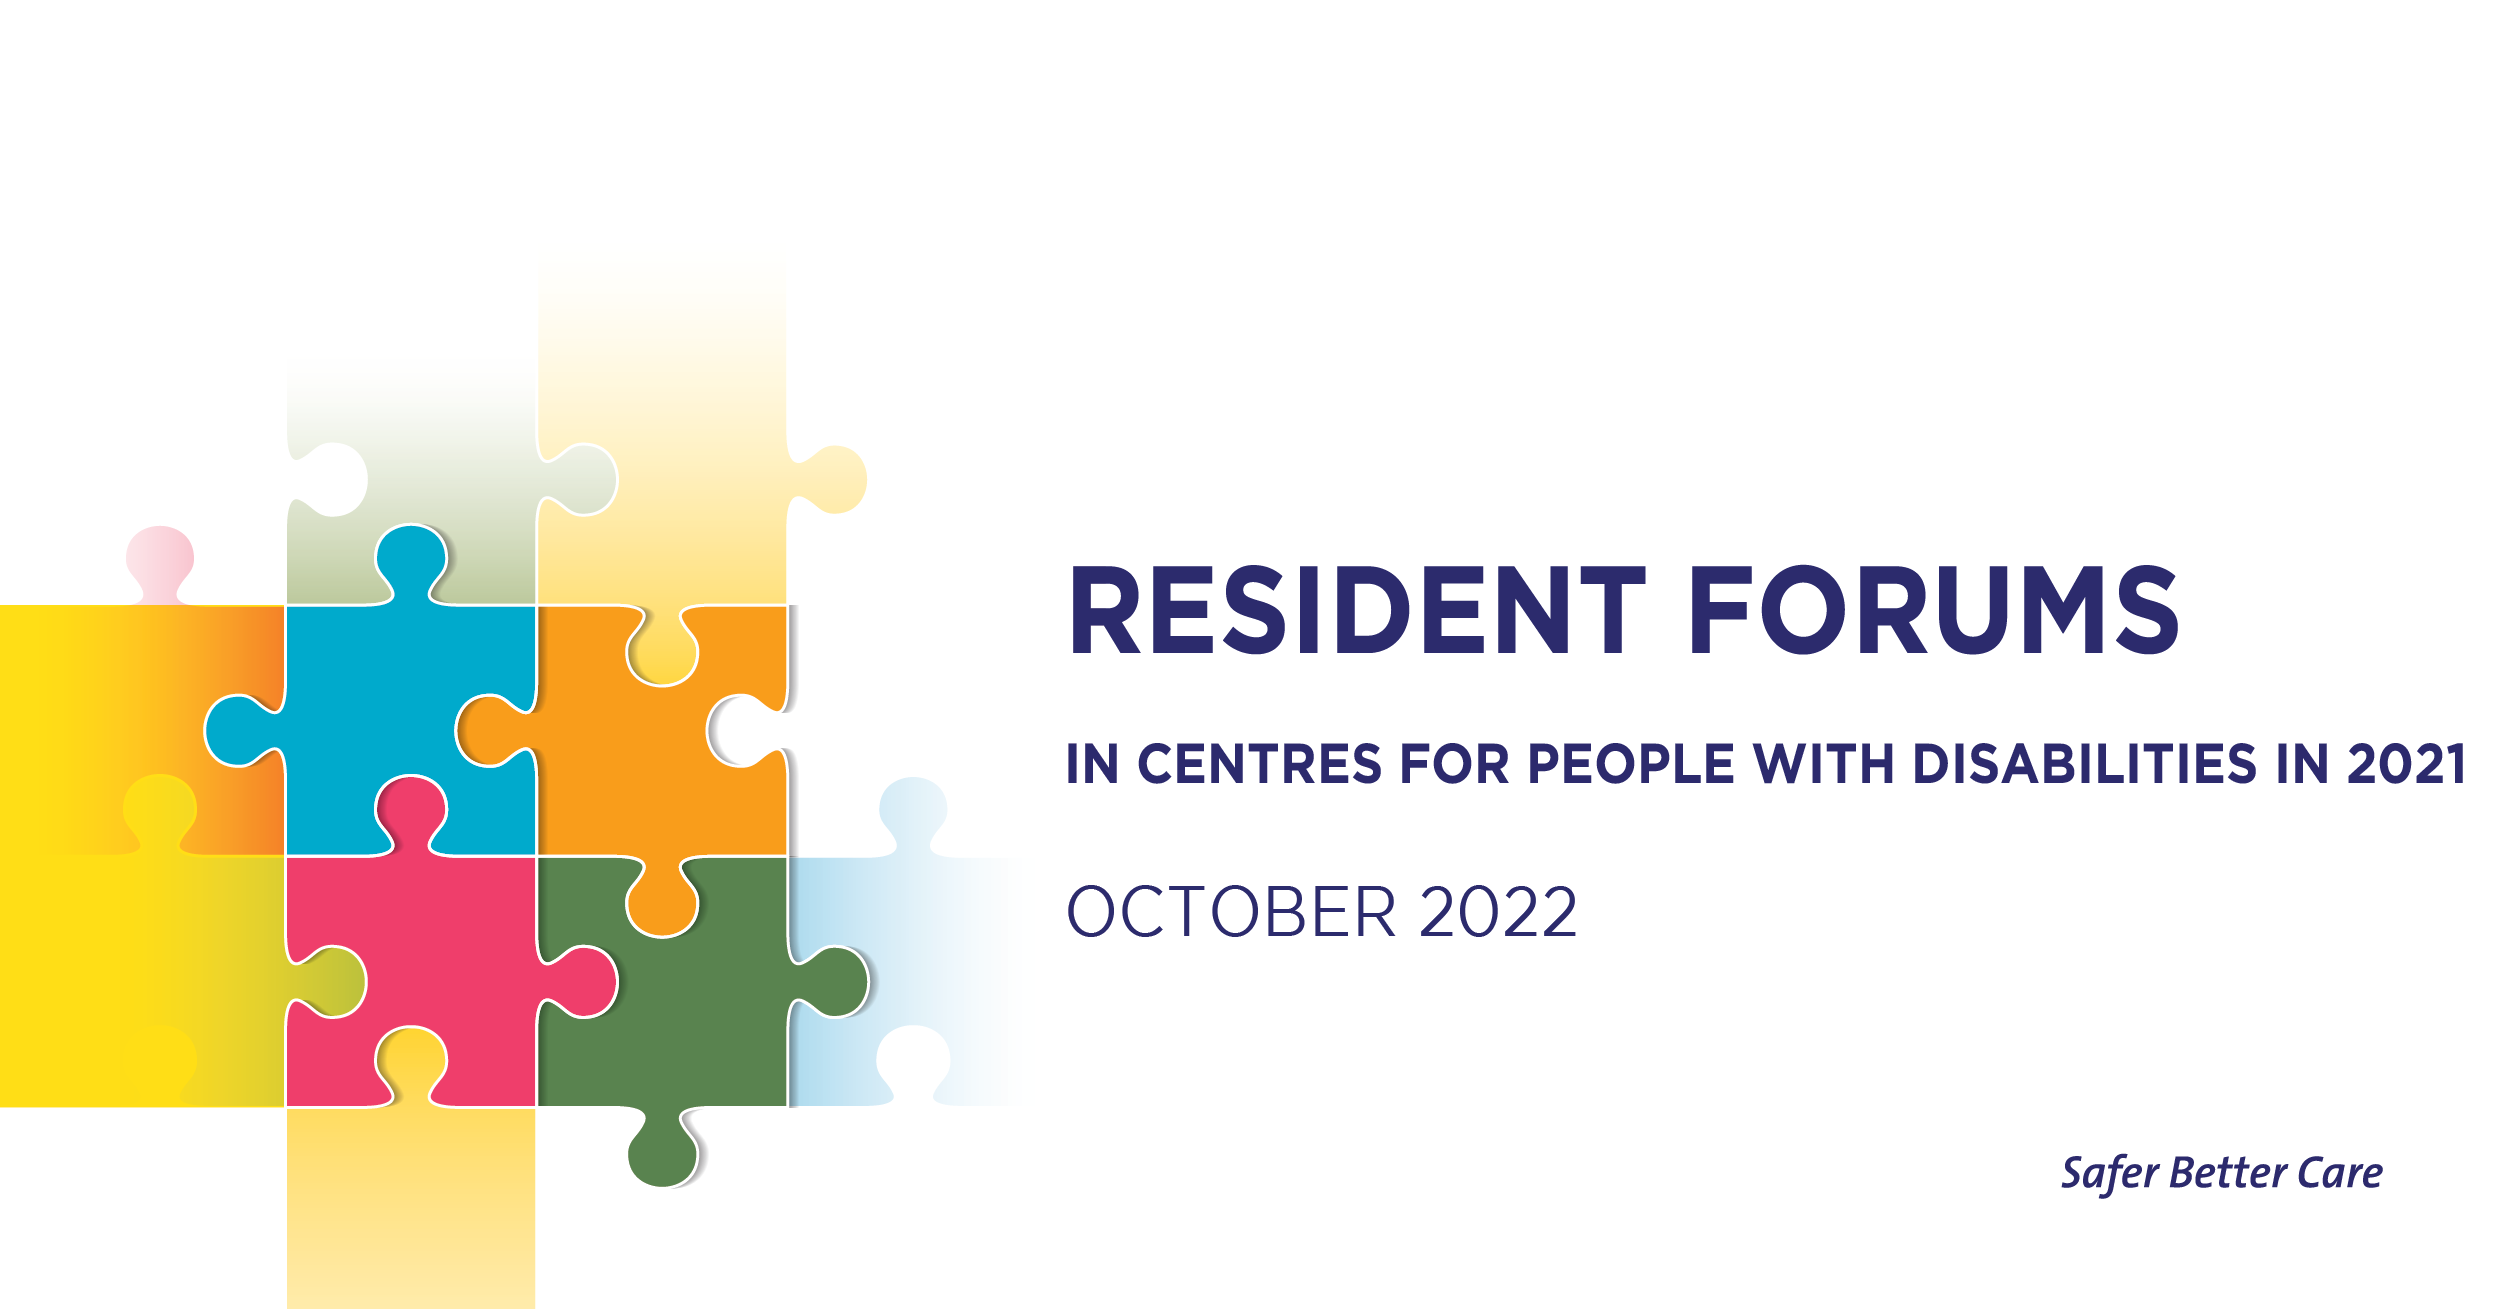 Resident forums in centres for people with disabilities in 2021